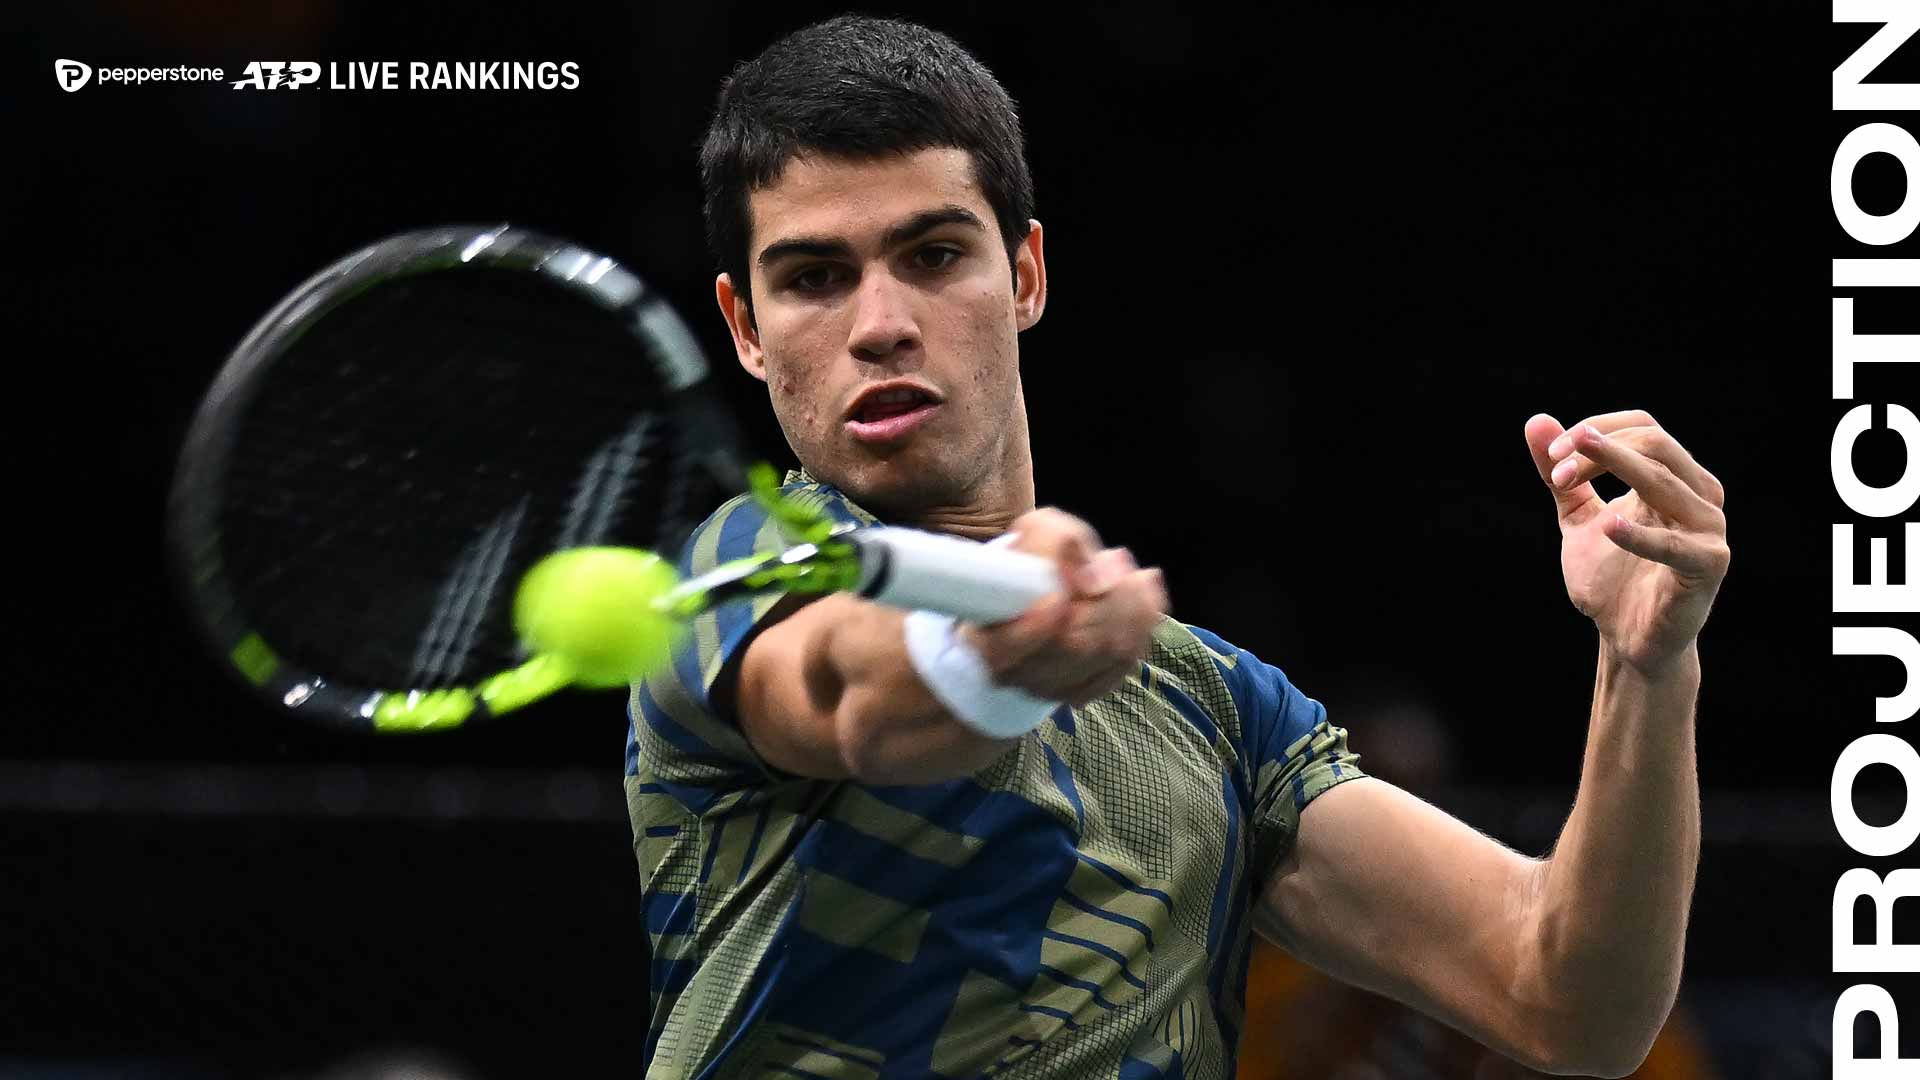 Carlos Alcaraz enters Indian Wells as the No. 2 player in the Pepperstone ATP Rankings.